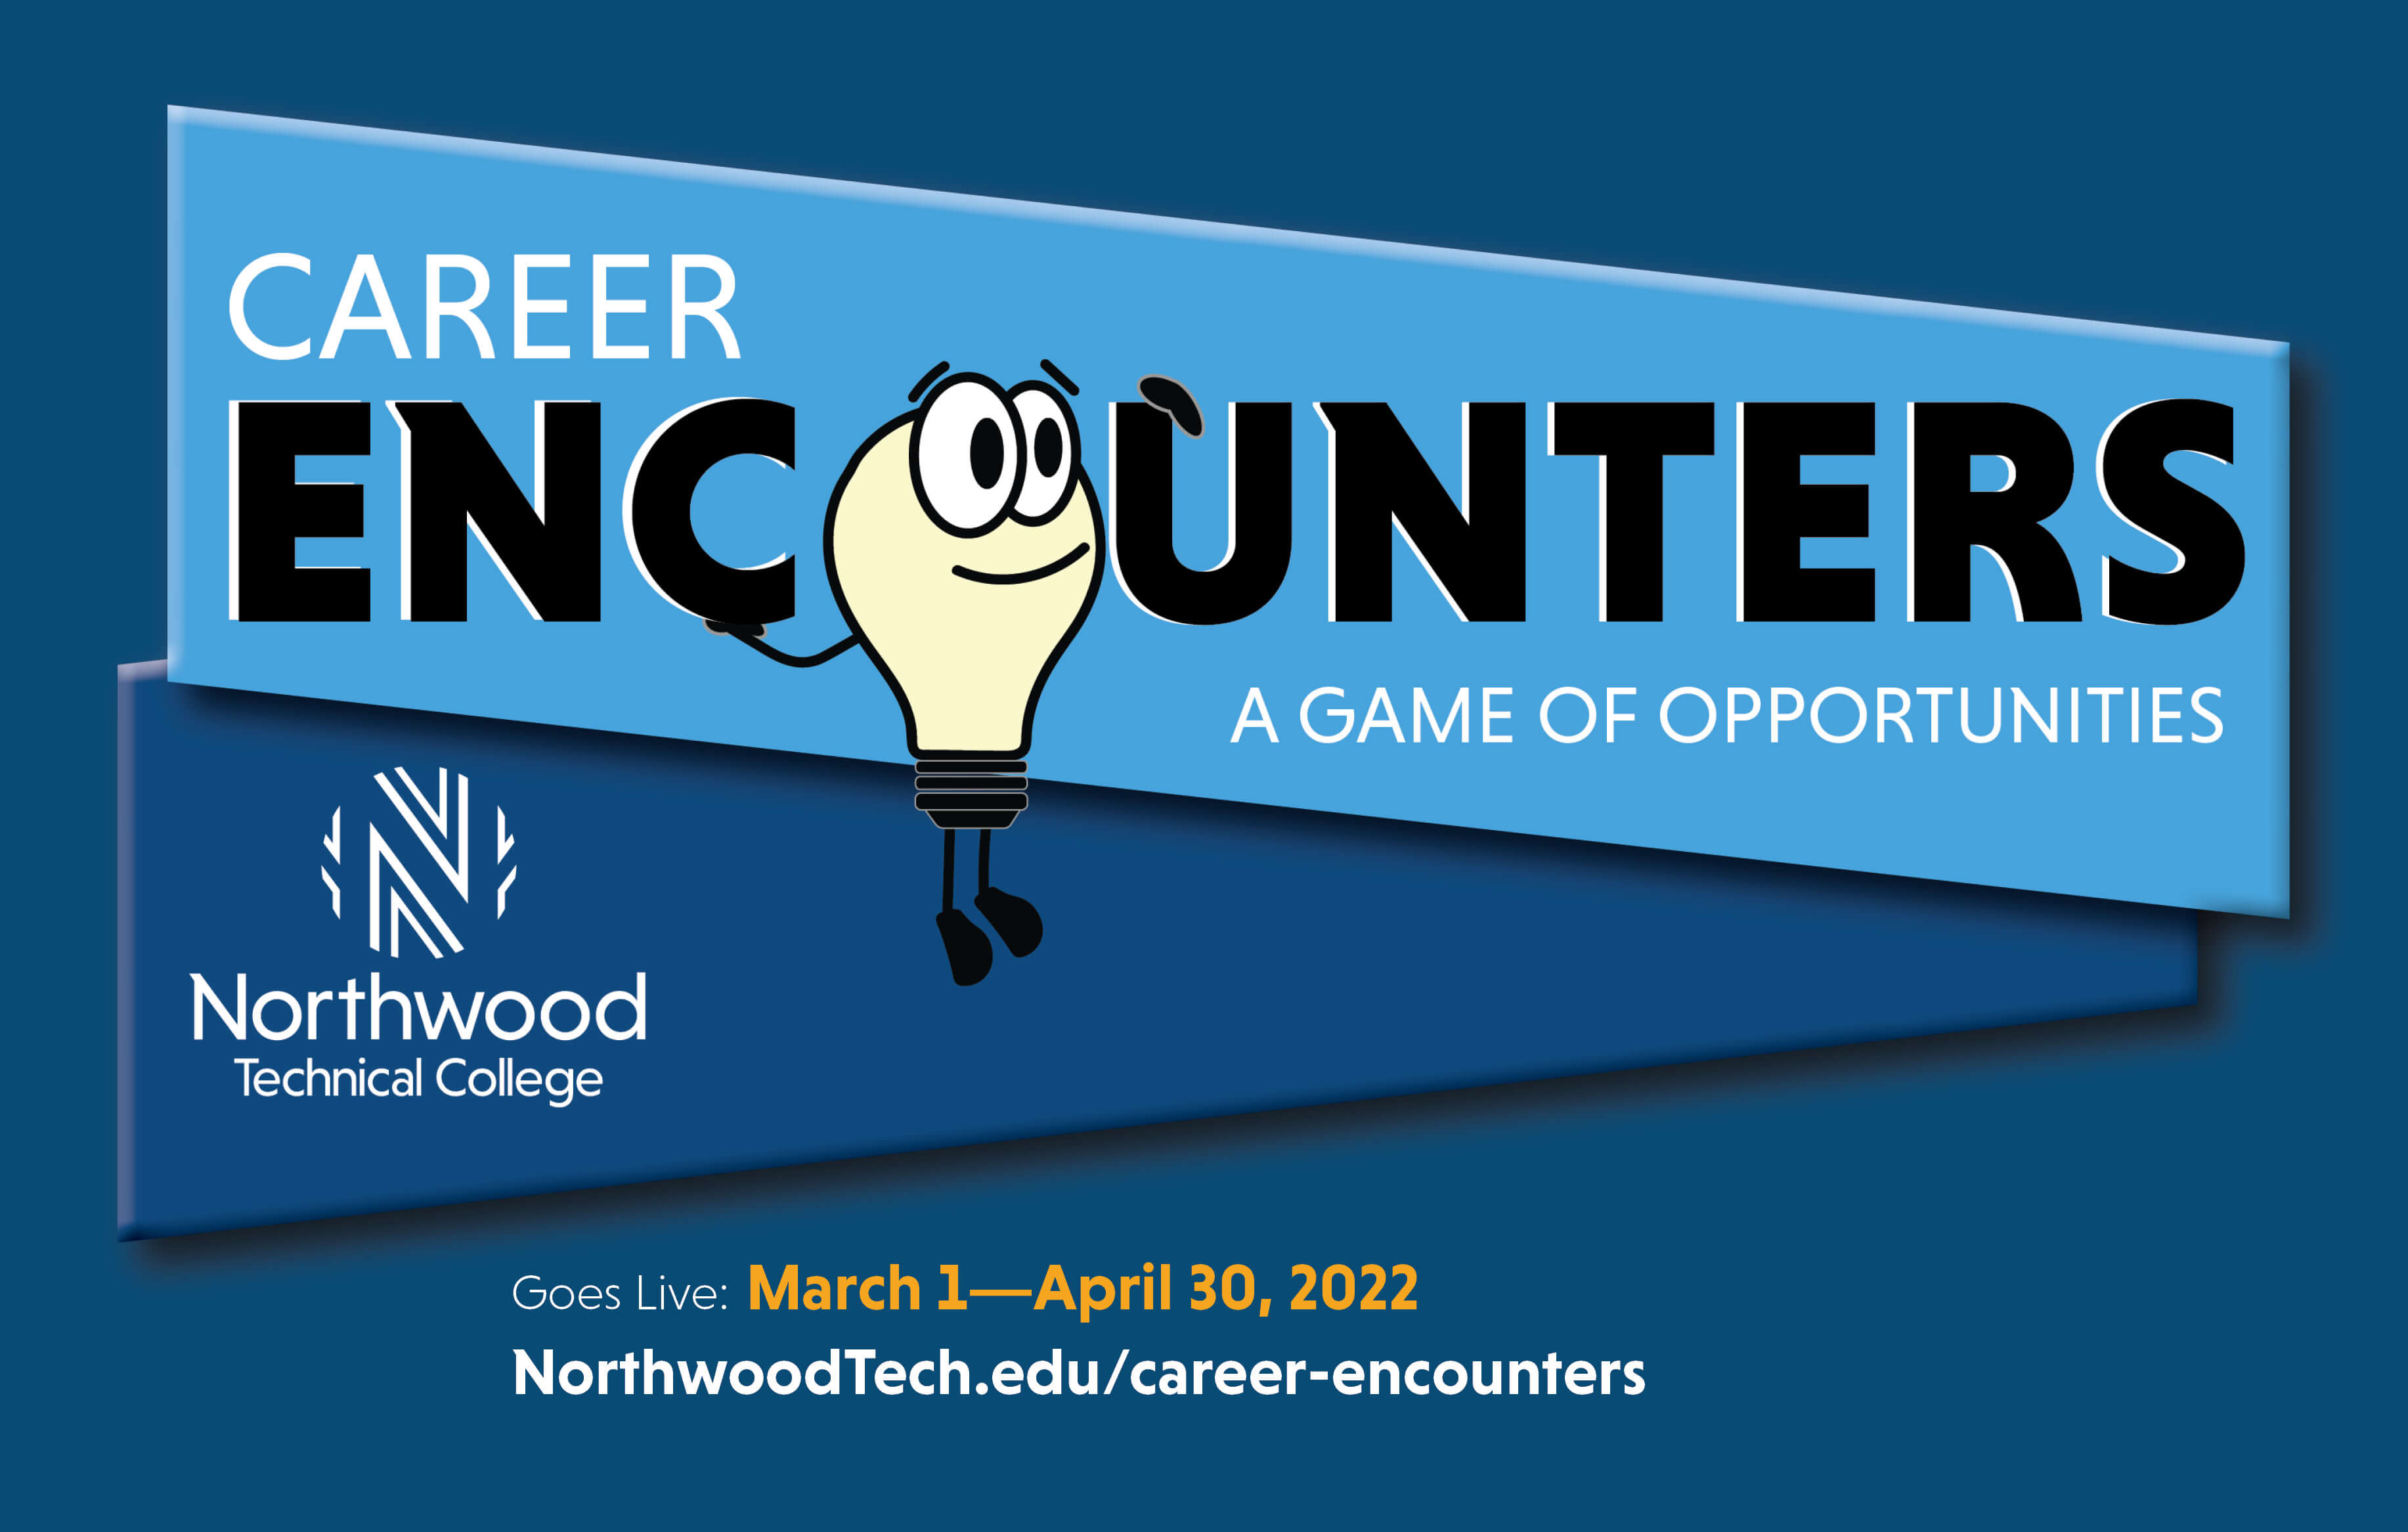 Career Encounters: A Game of Opportunities